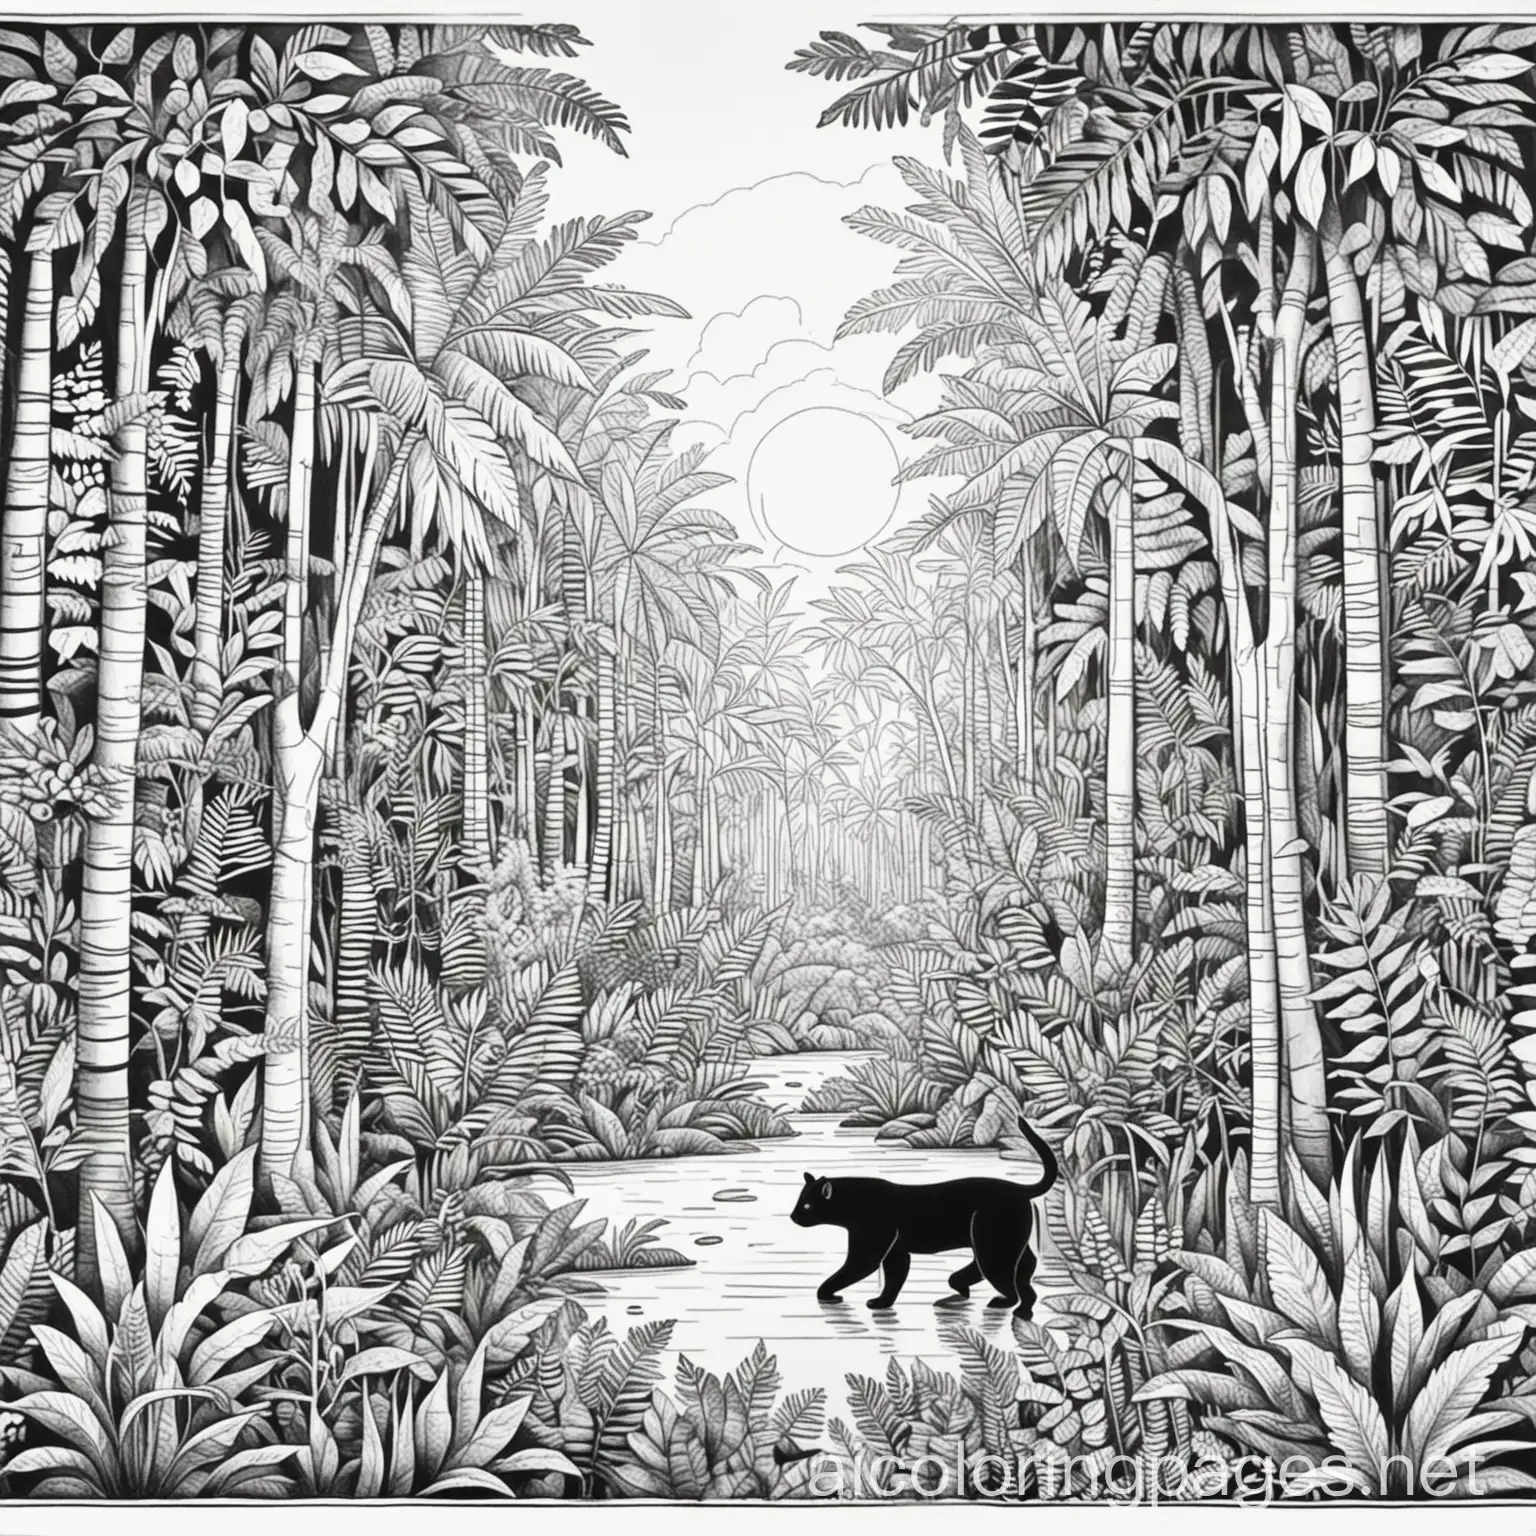 Simplicity-in-Henri-Rousseau-Style-Coloring-Page-Jungle-Scene-for-Children